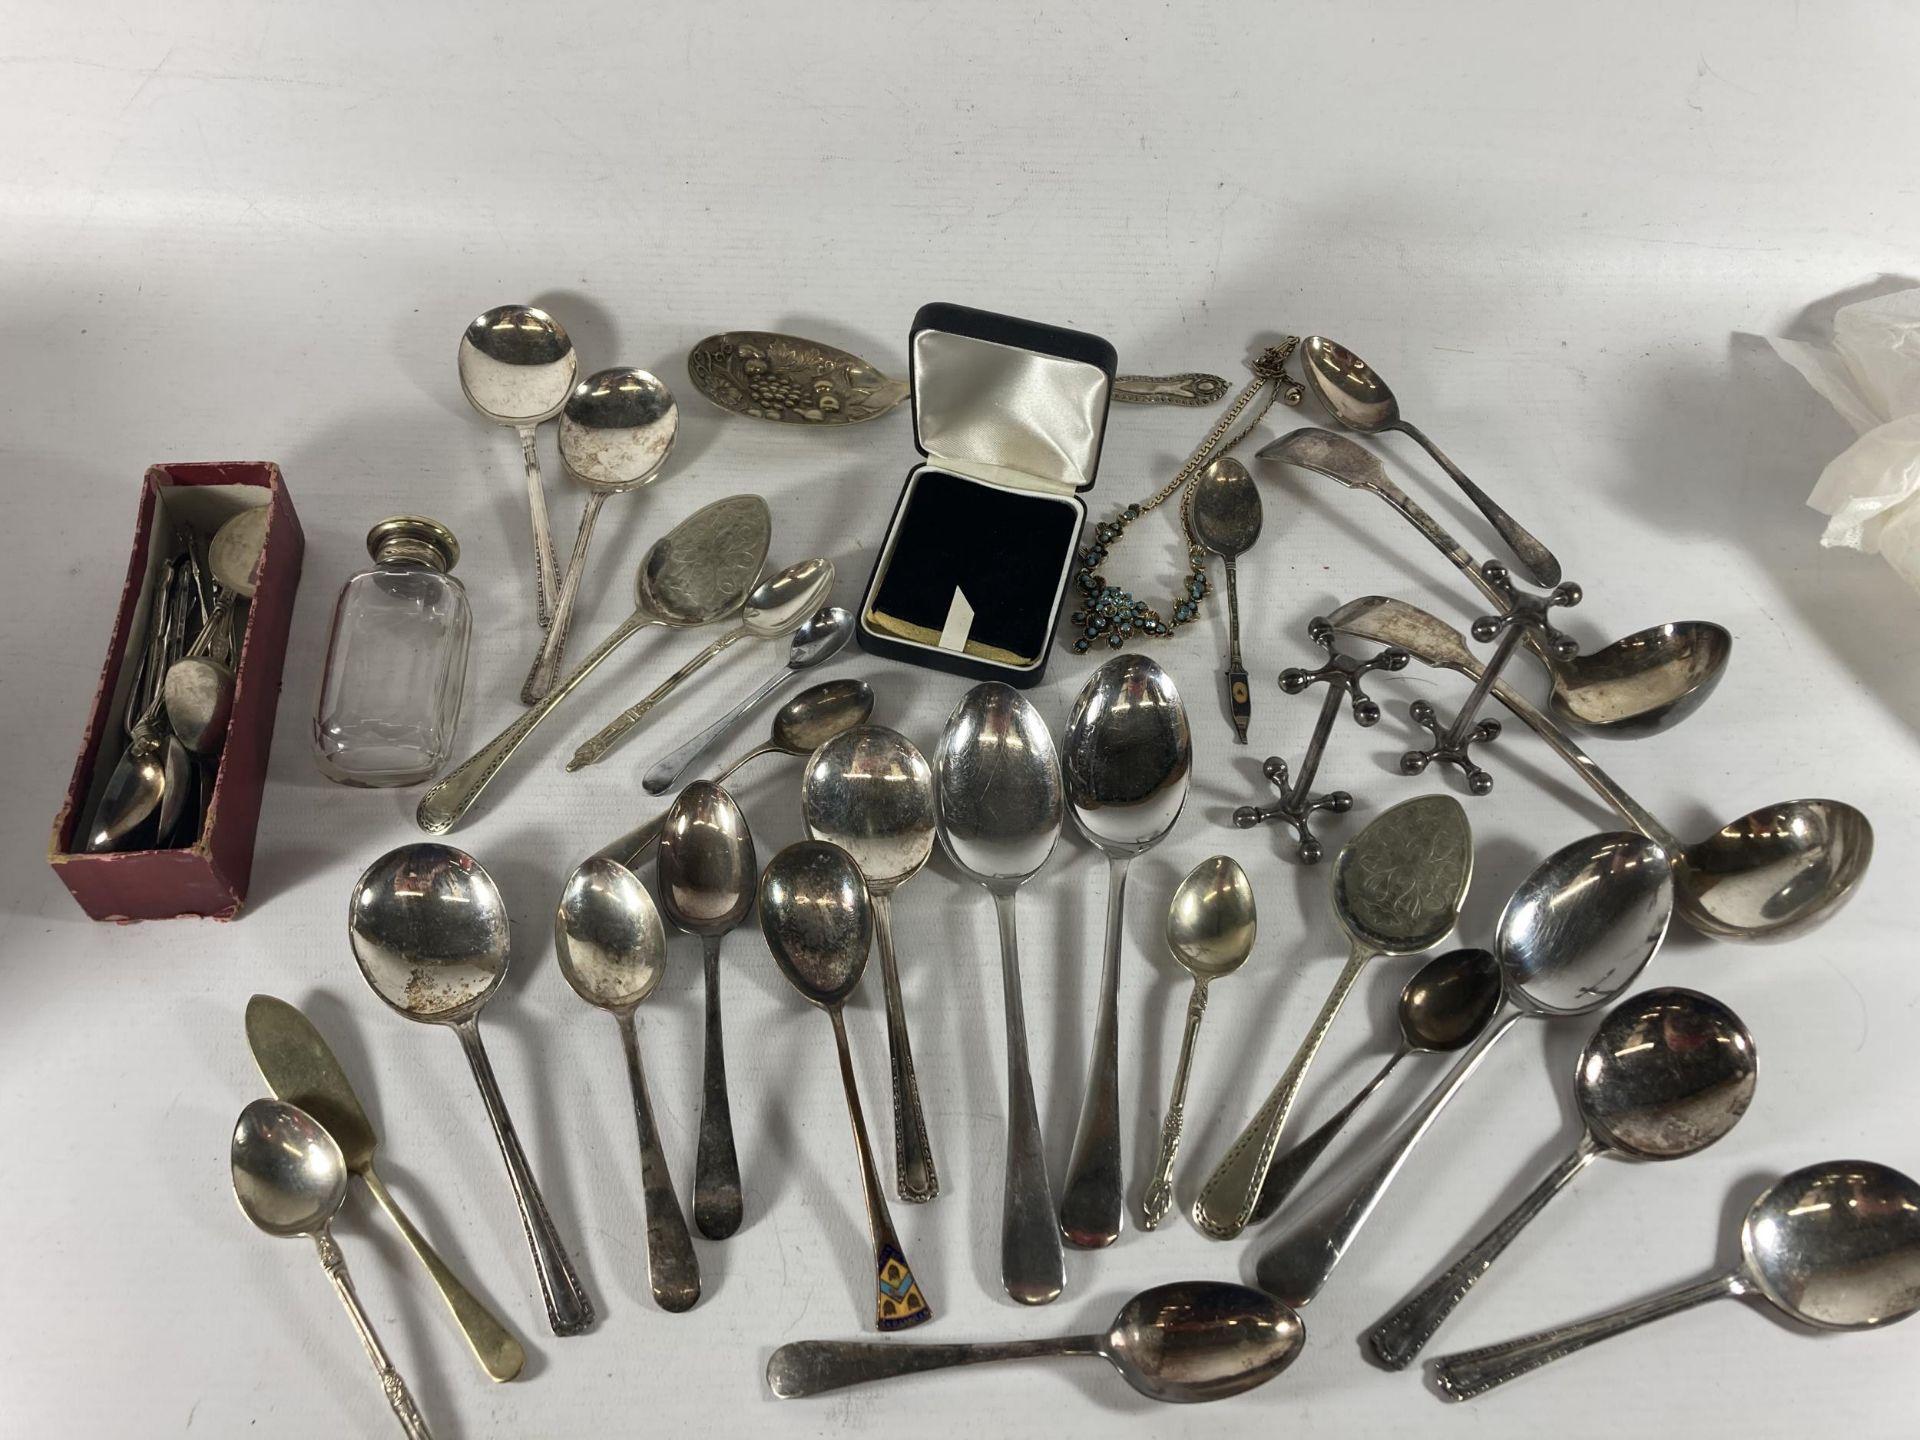 A QUANTITY OF VINTAGE FLATWARE TO INCLUDE LADELS, APOSTLE TEASPOONS, A BERRY SPOON, A WHITE METAL